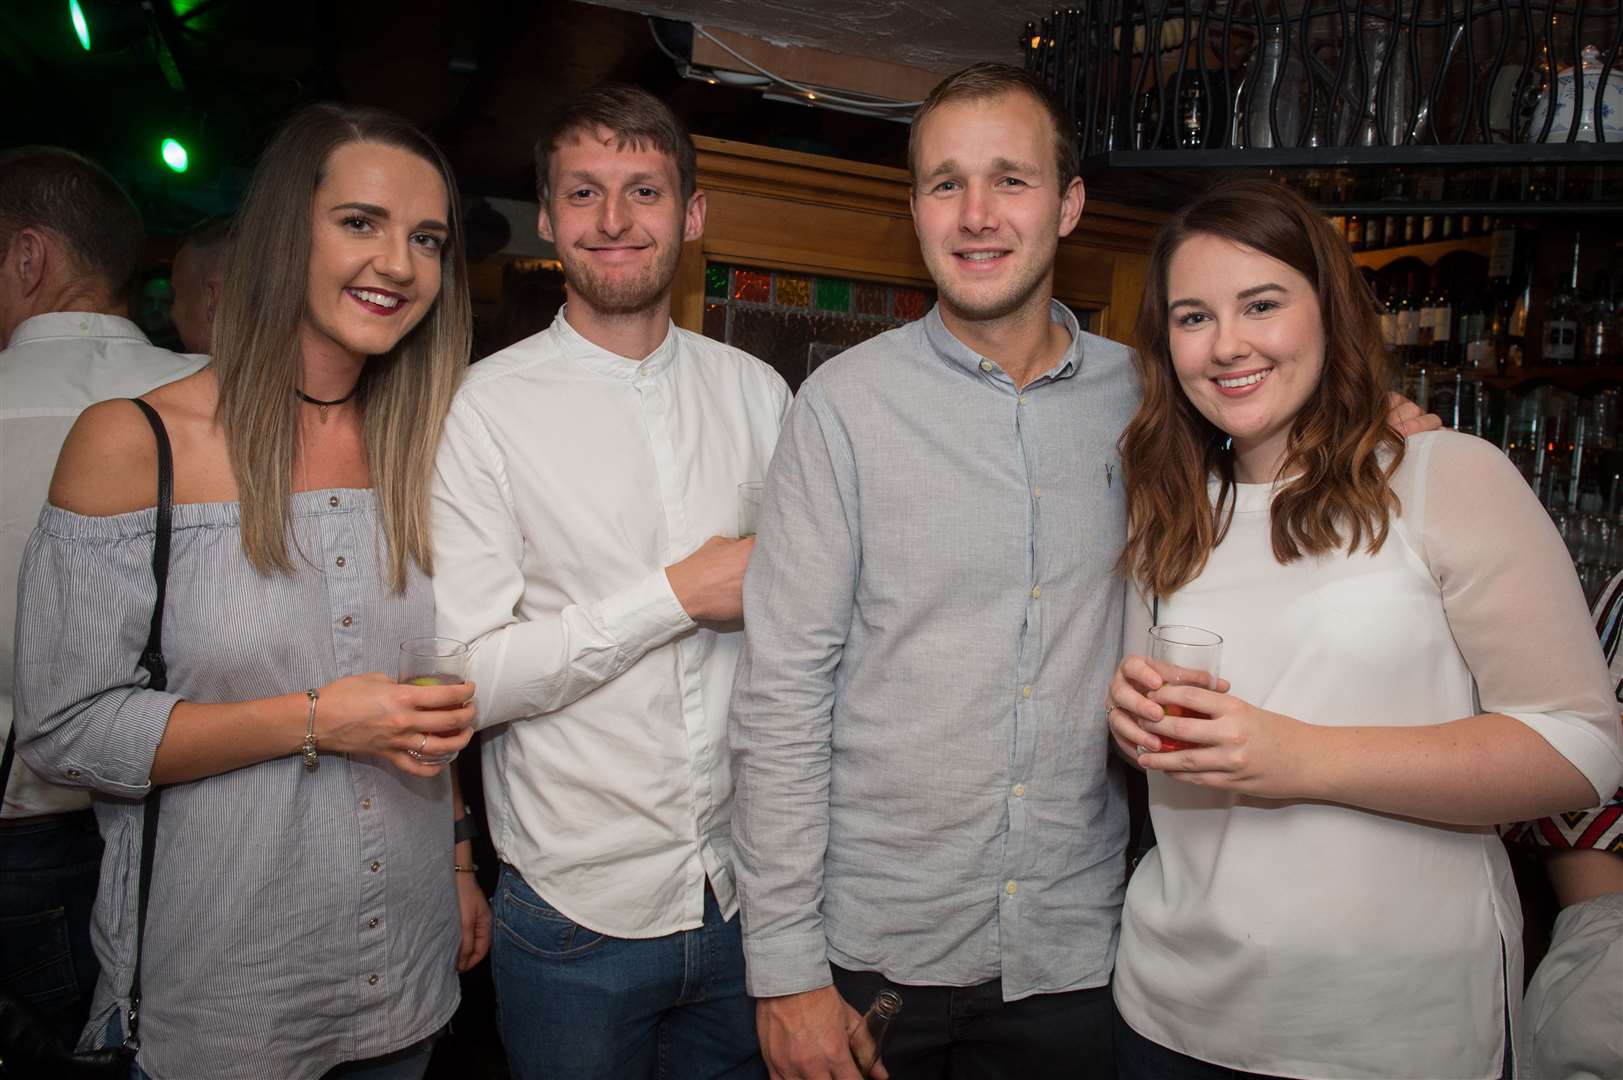 CitySeen 02SEP2017 ..Night out for friends (left to right) Rae Wilson, Johnny Gott, Gavin Reid and Jodie Reid...Picture: Callum Mackay. Image No. 038786.